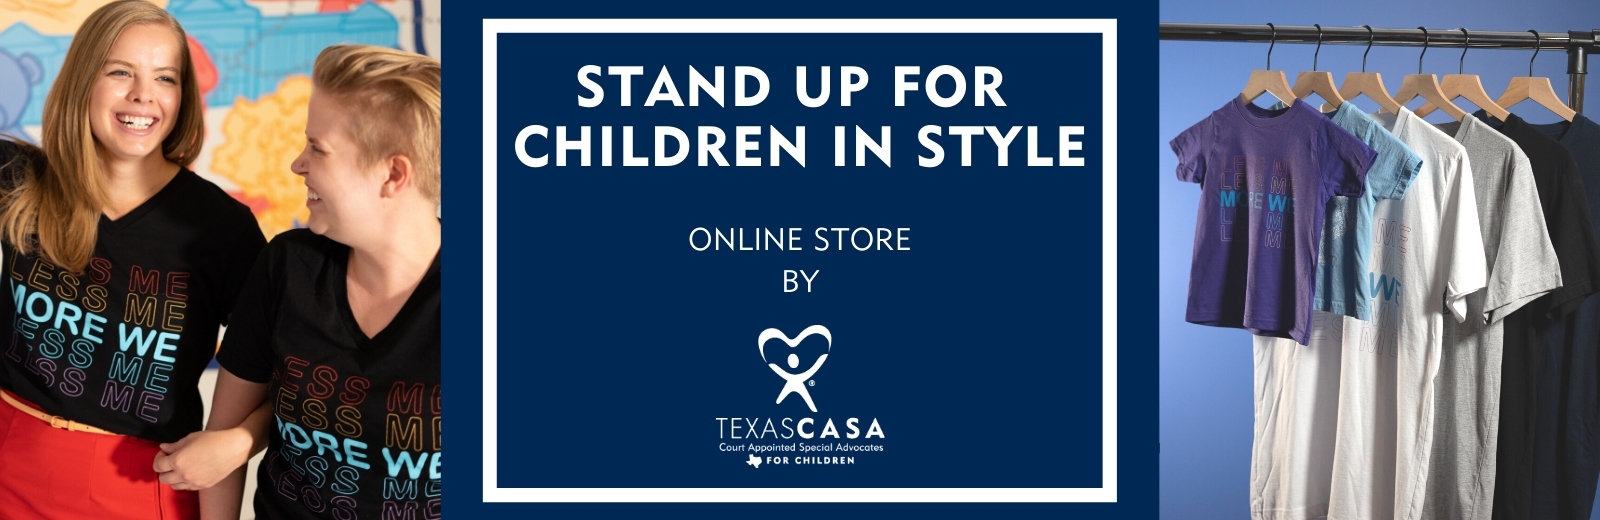 Stand Up for Children in Style